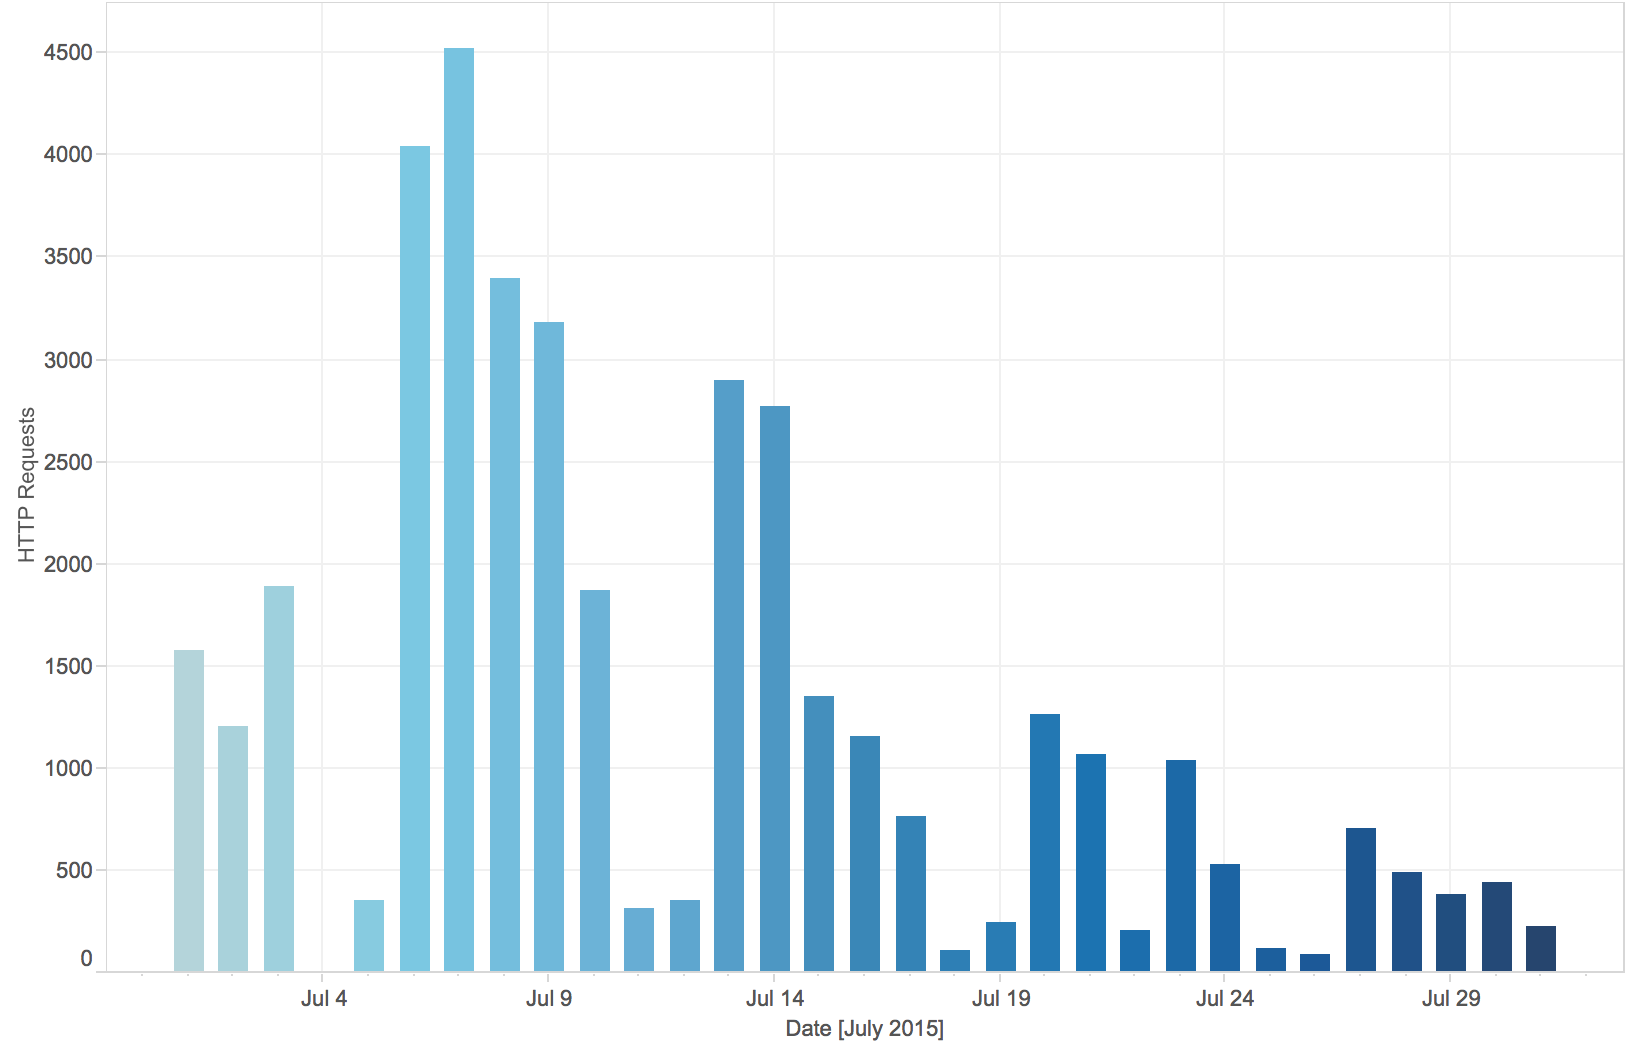 Graph showing Angler http requests by day in July 2015